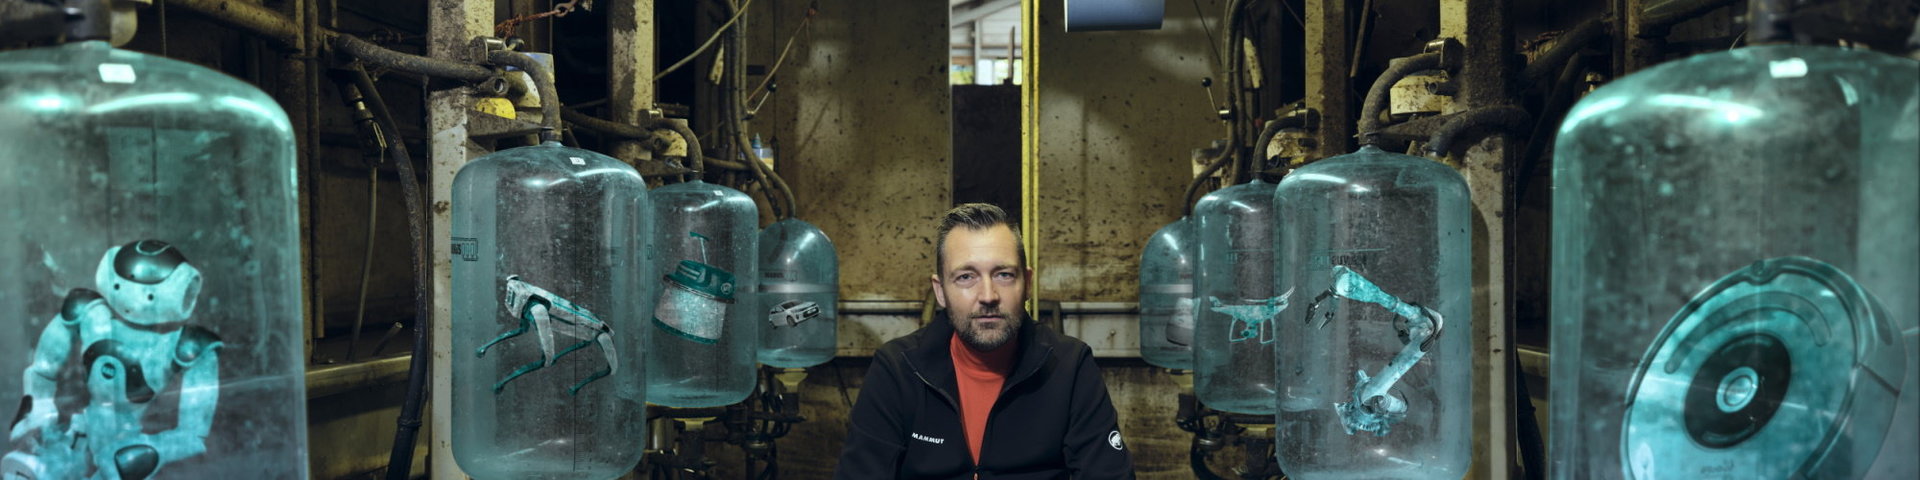 Marco Rozendaal photographed in AI factory